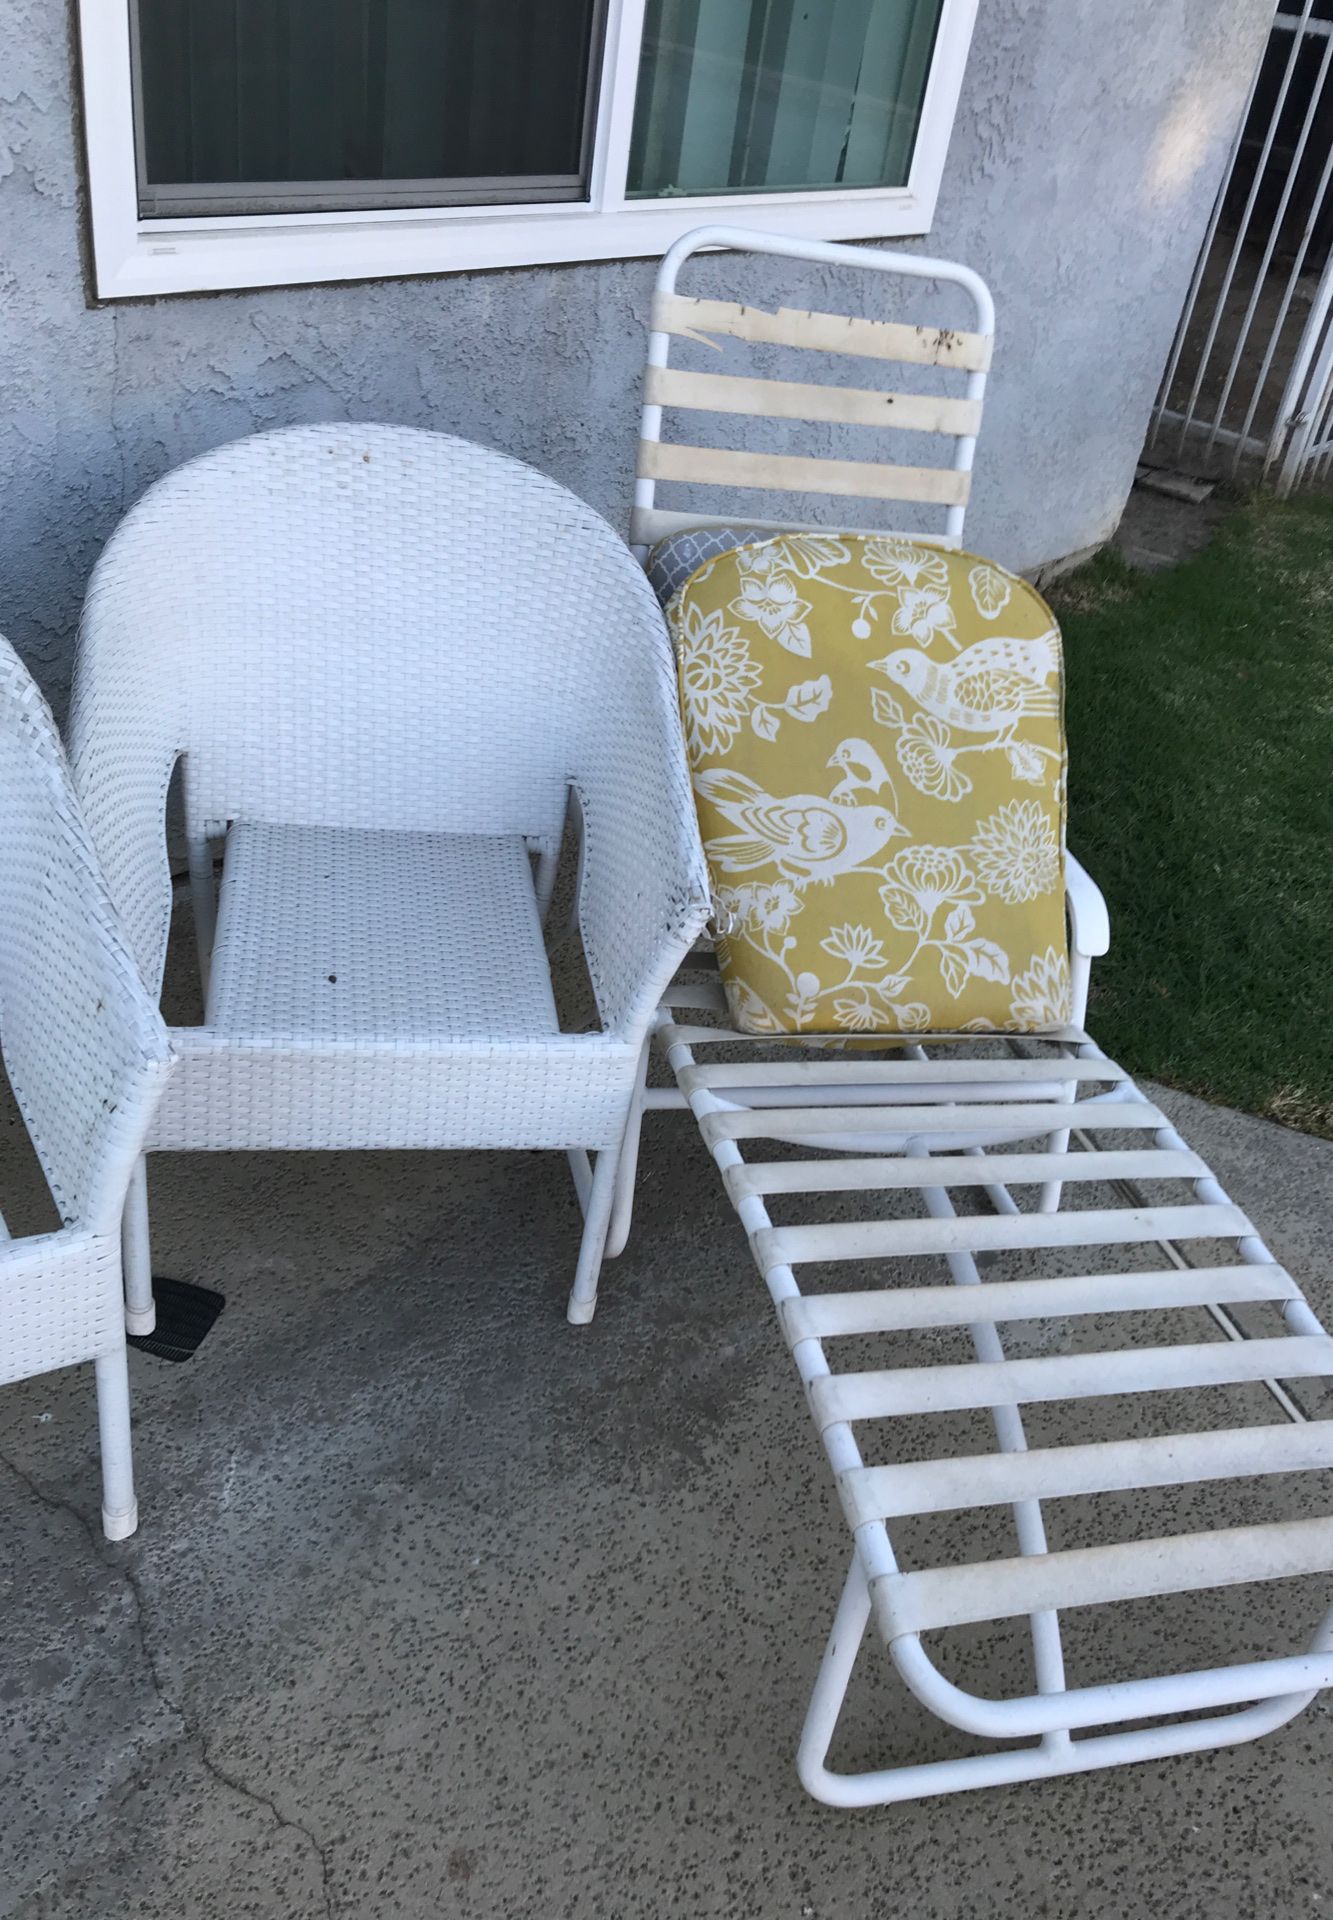 Free chairs